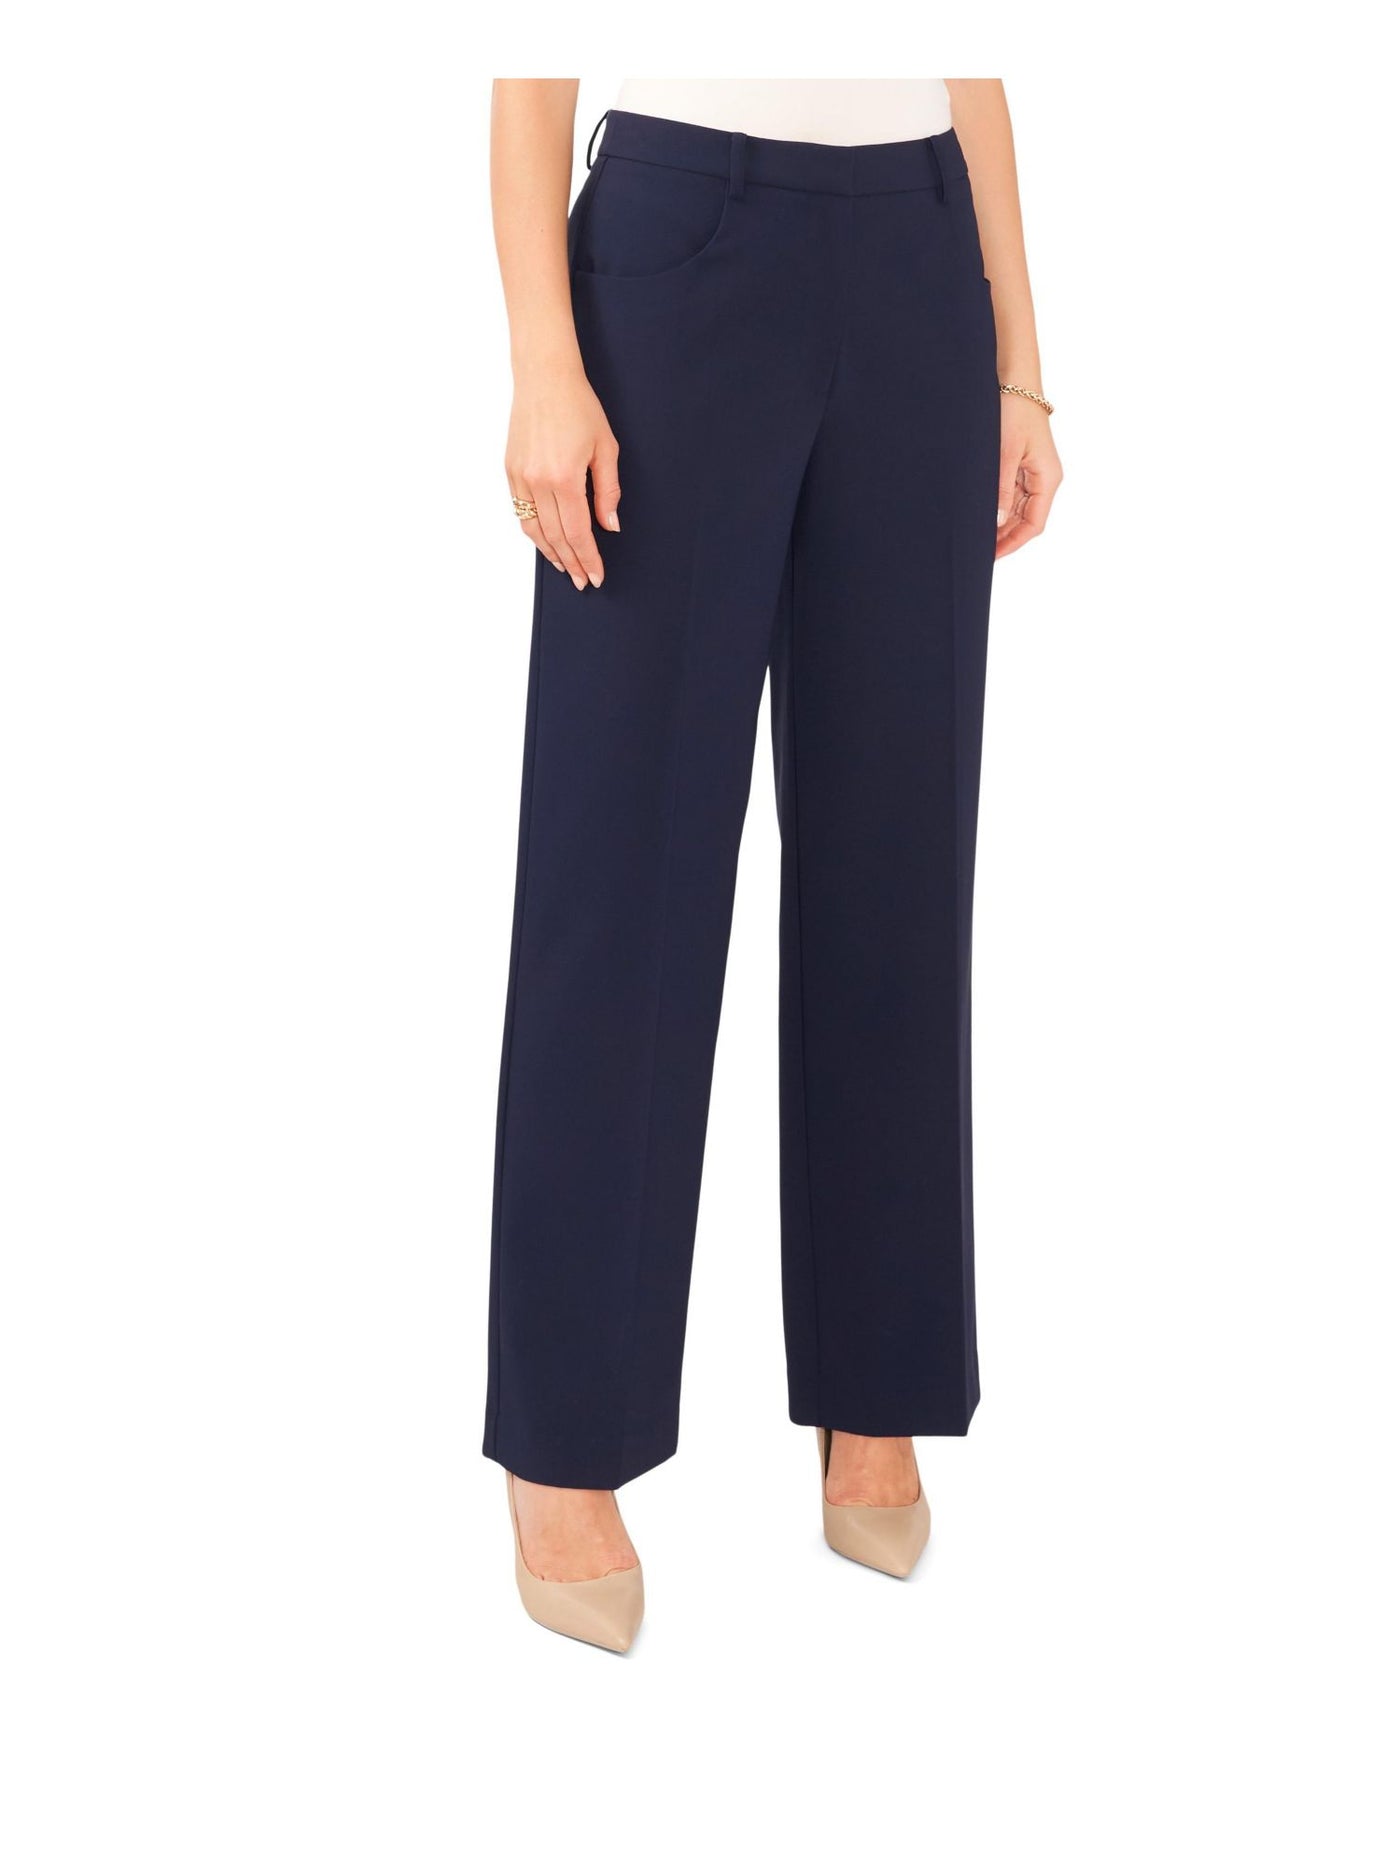 VINCE CAMUTO Womens Navy Zippered Pocketed Wear To Work Wide Leg Pants 14